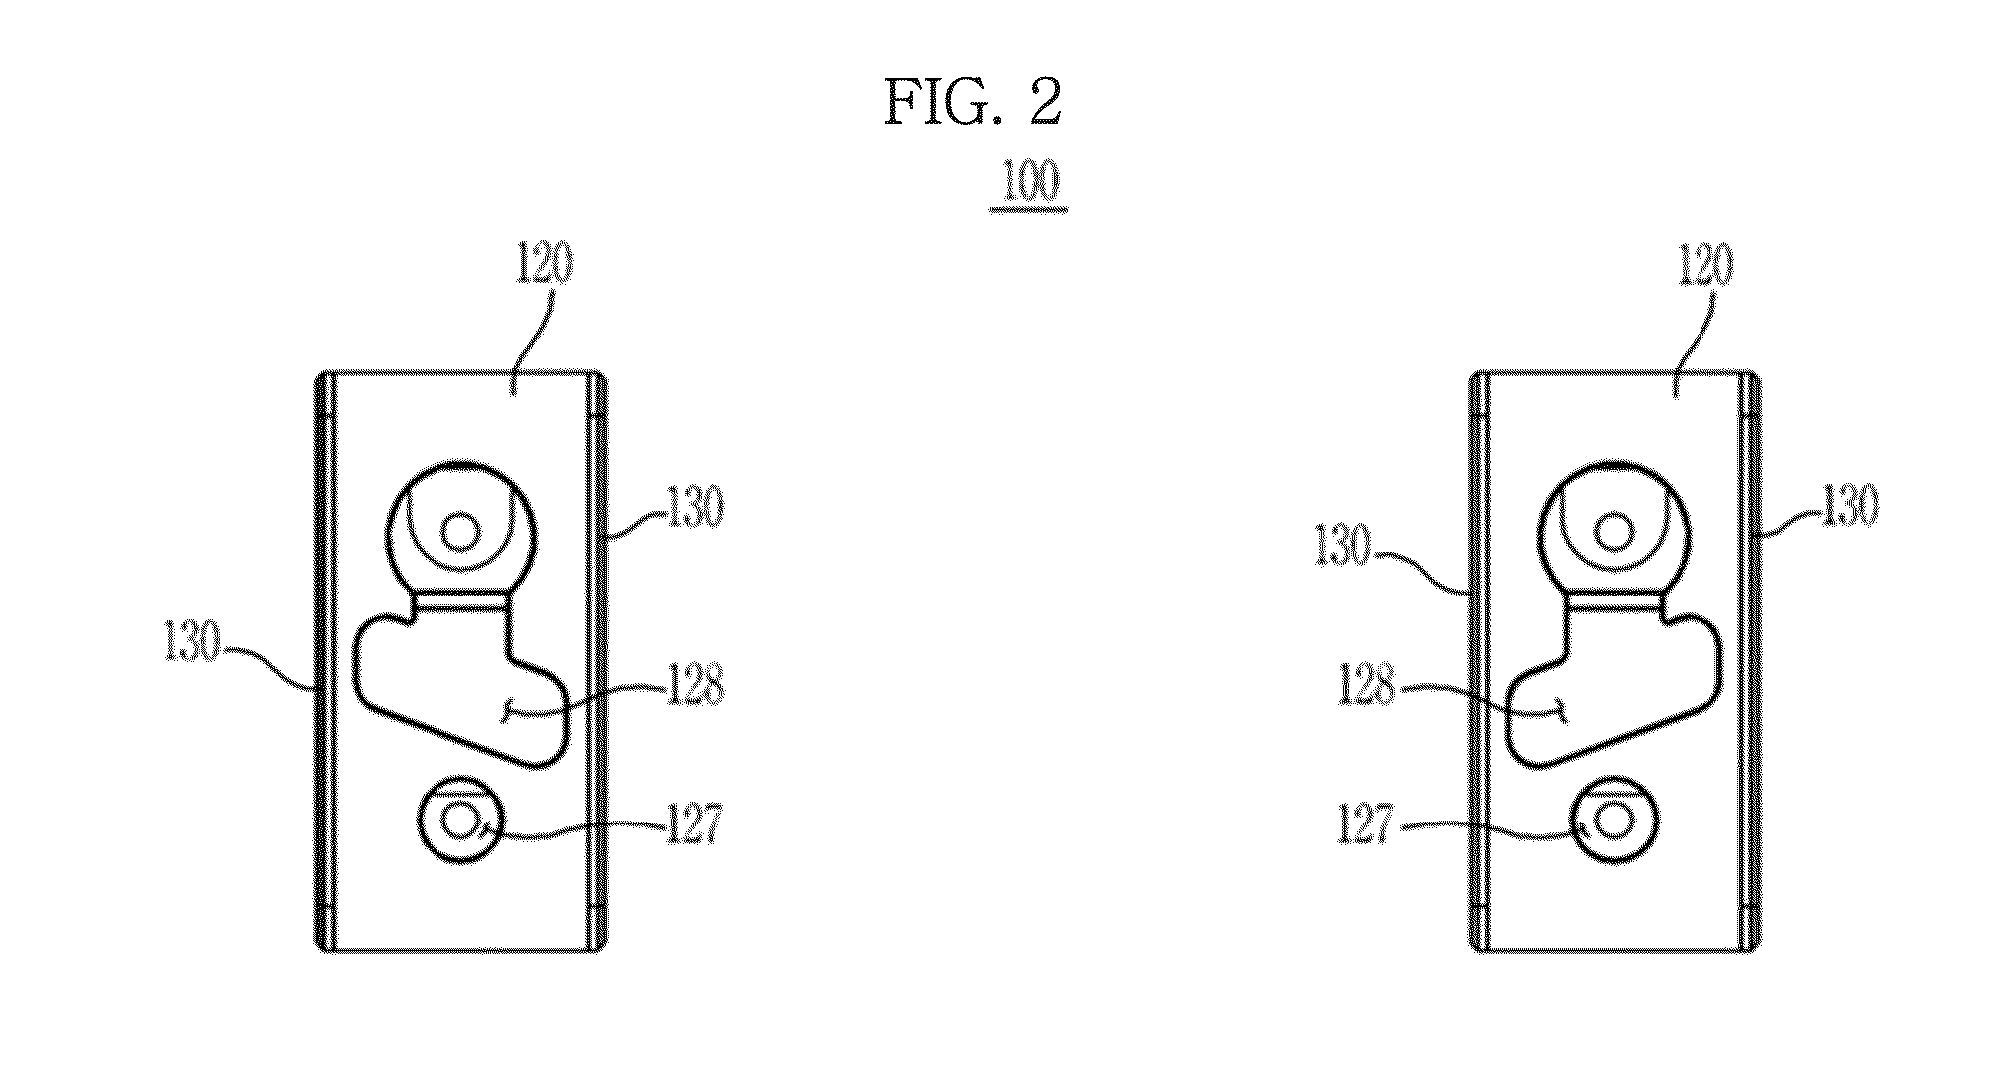 Supporting device to display apparatus